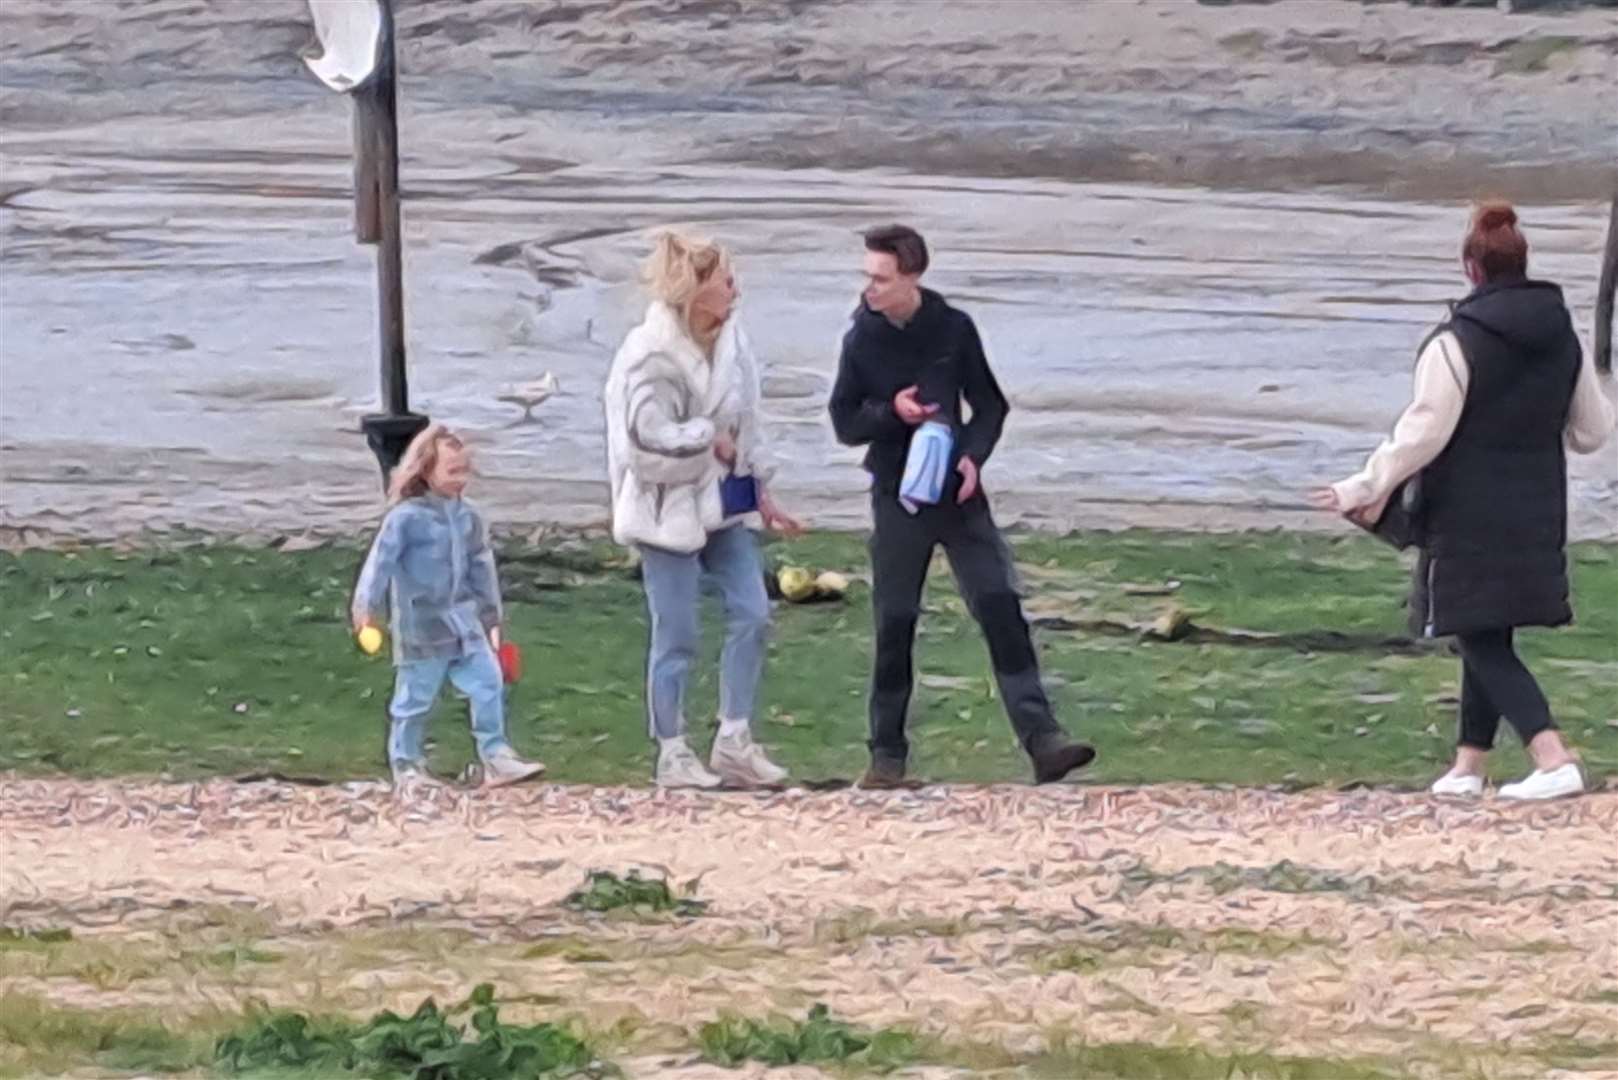 Sophie Turner was spotted filming on Herne Bay beach